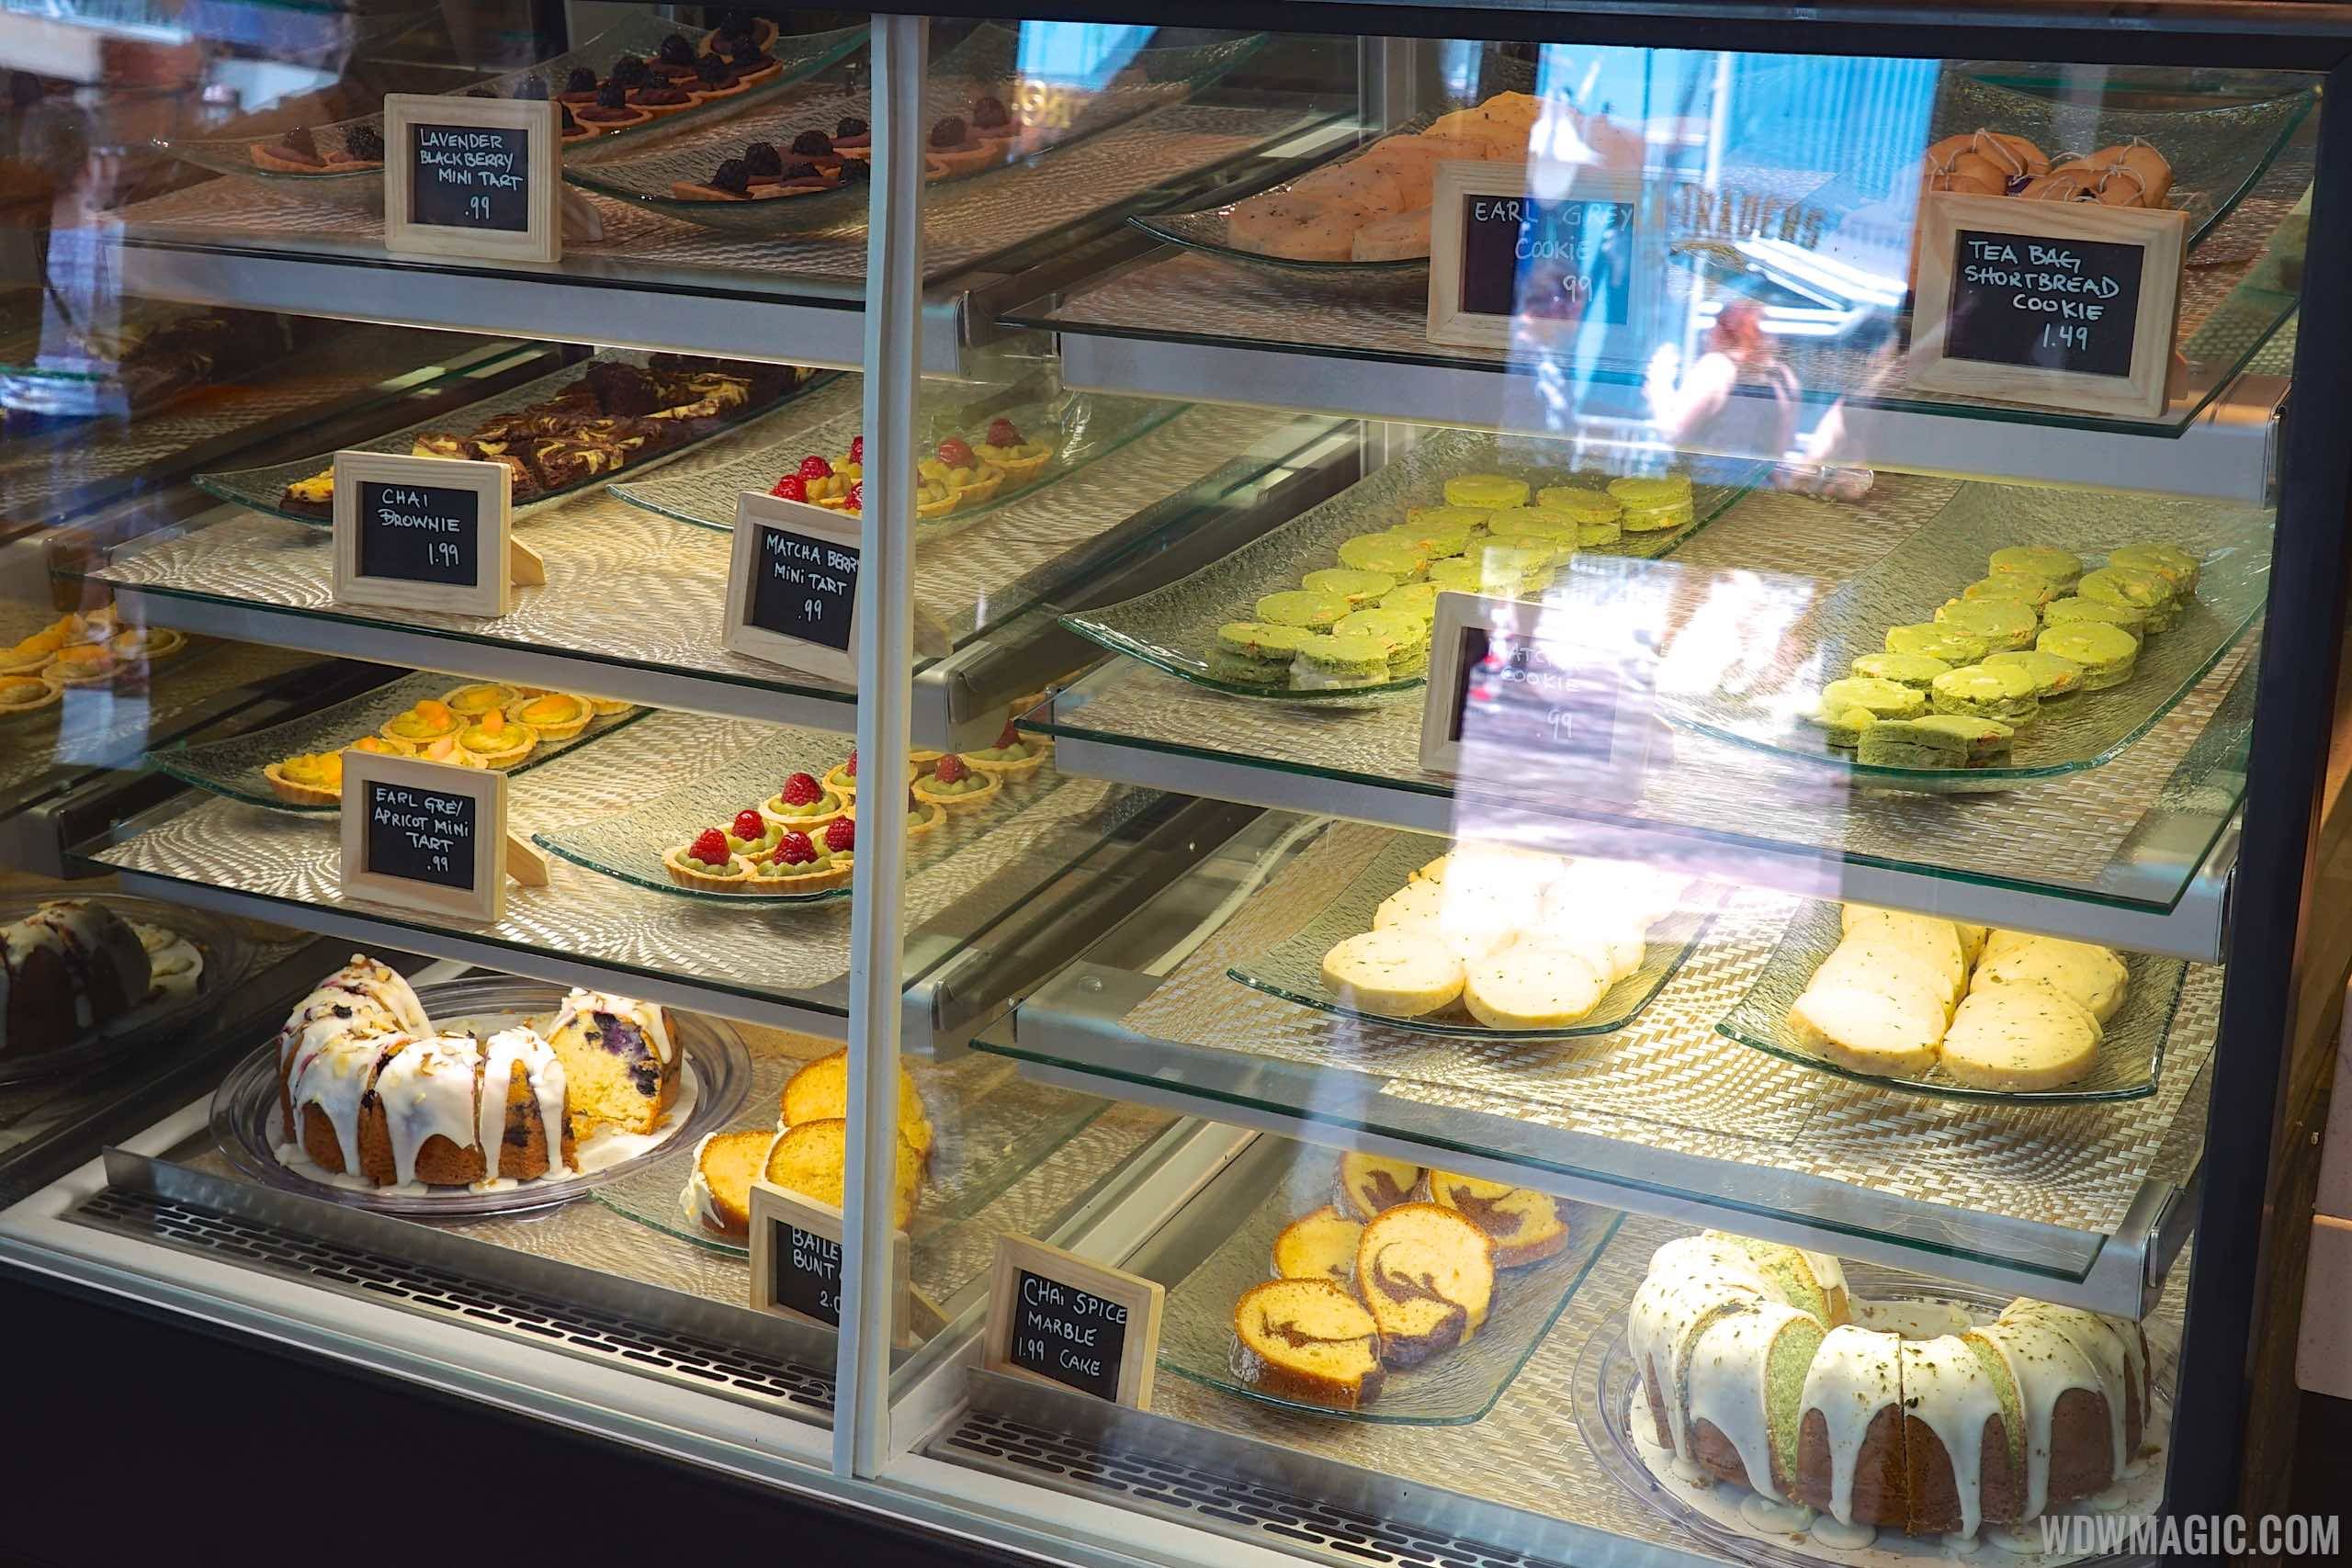 The Tea Traders Cafe - Baked Goods case